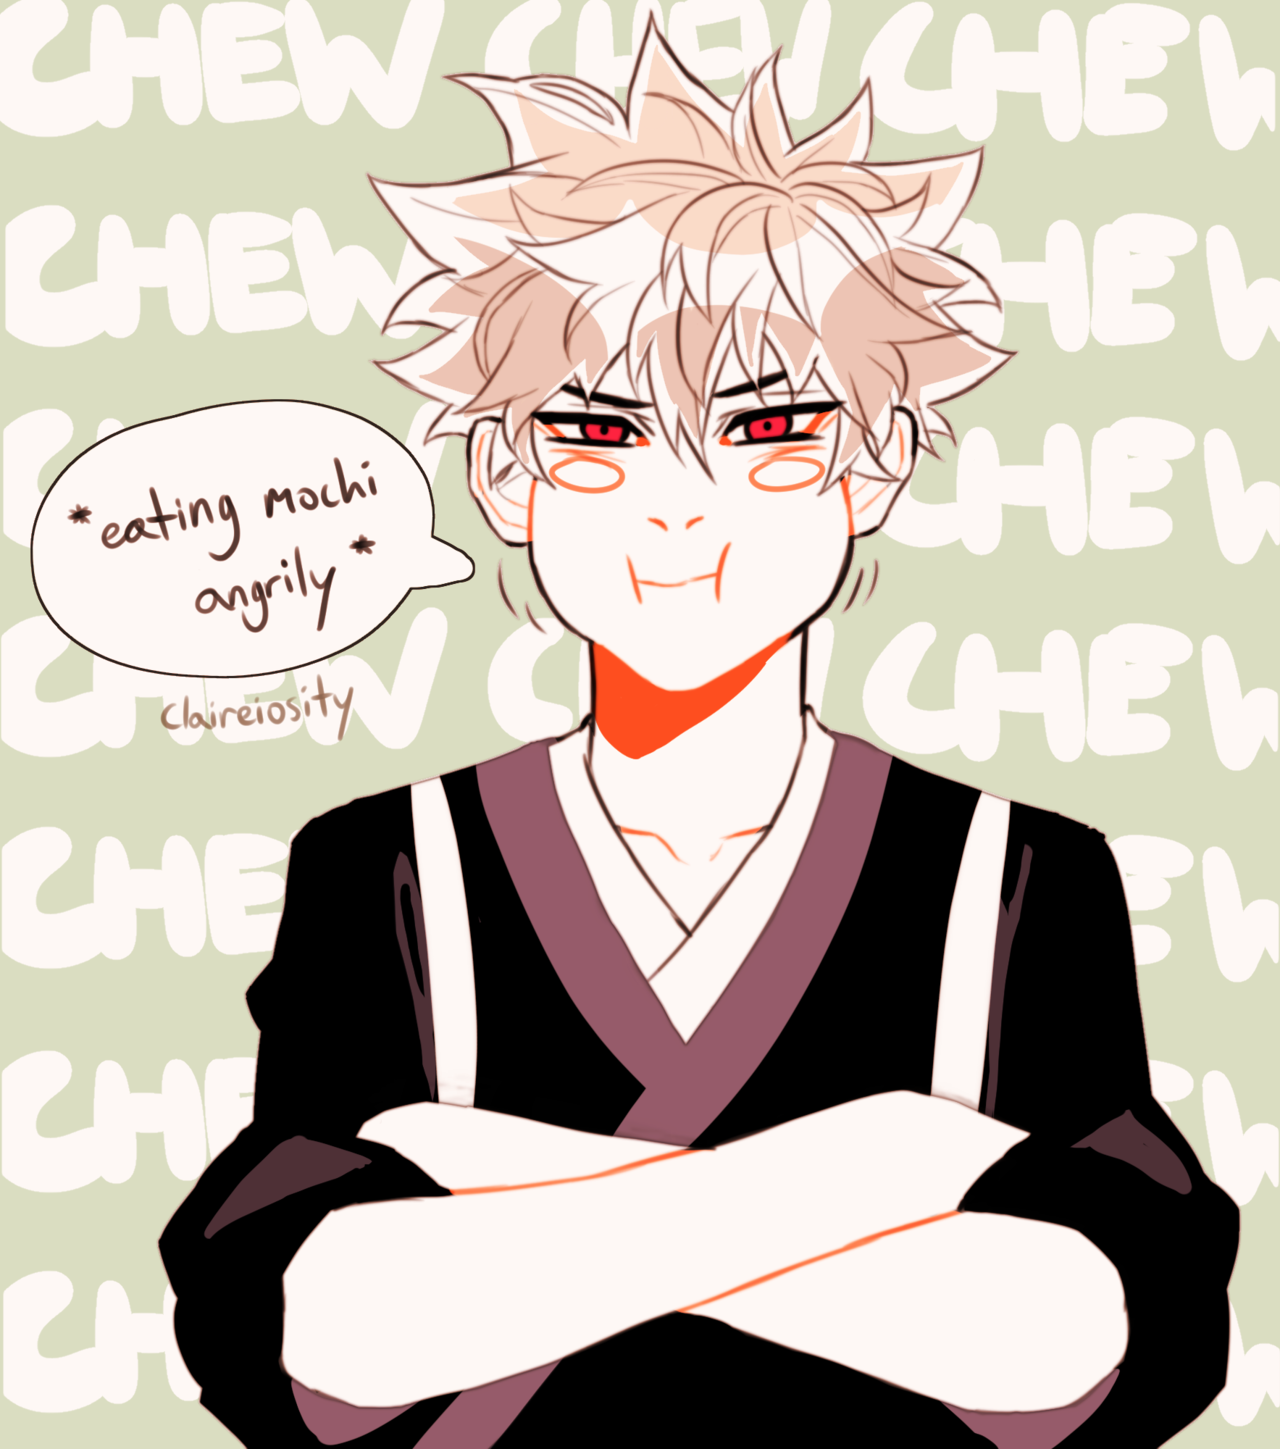 in love with a chainsaw, bakugou suffers from a severe case of mochi cheeks